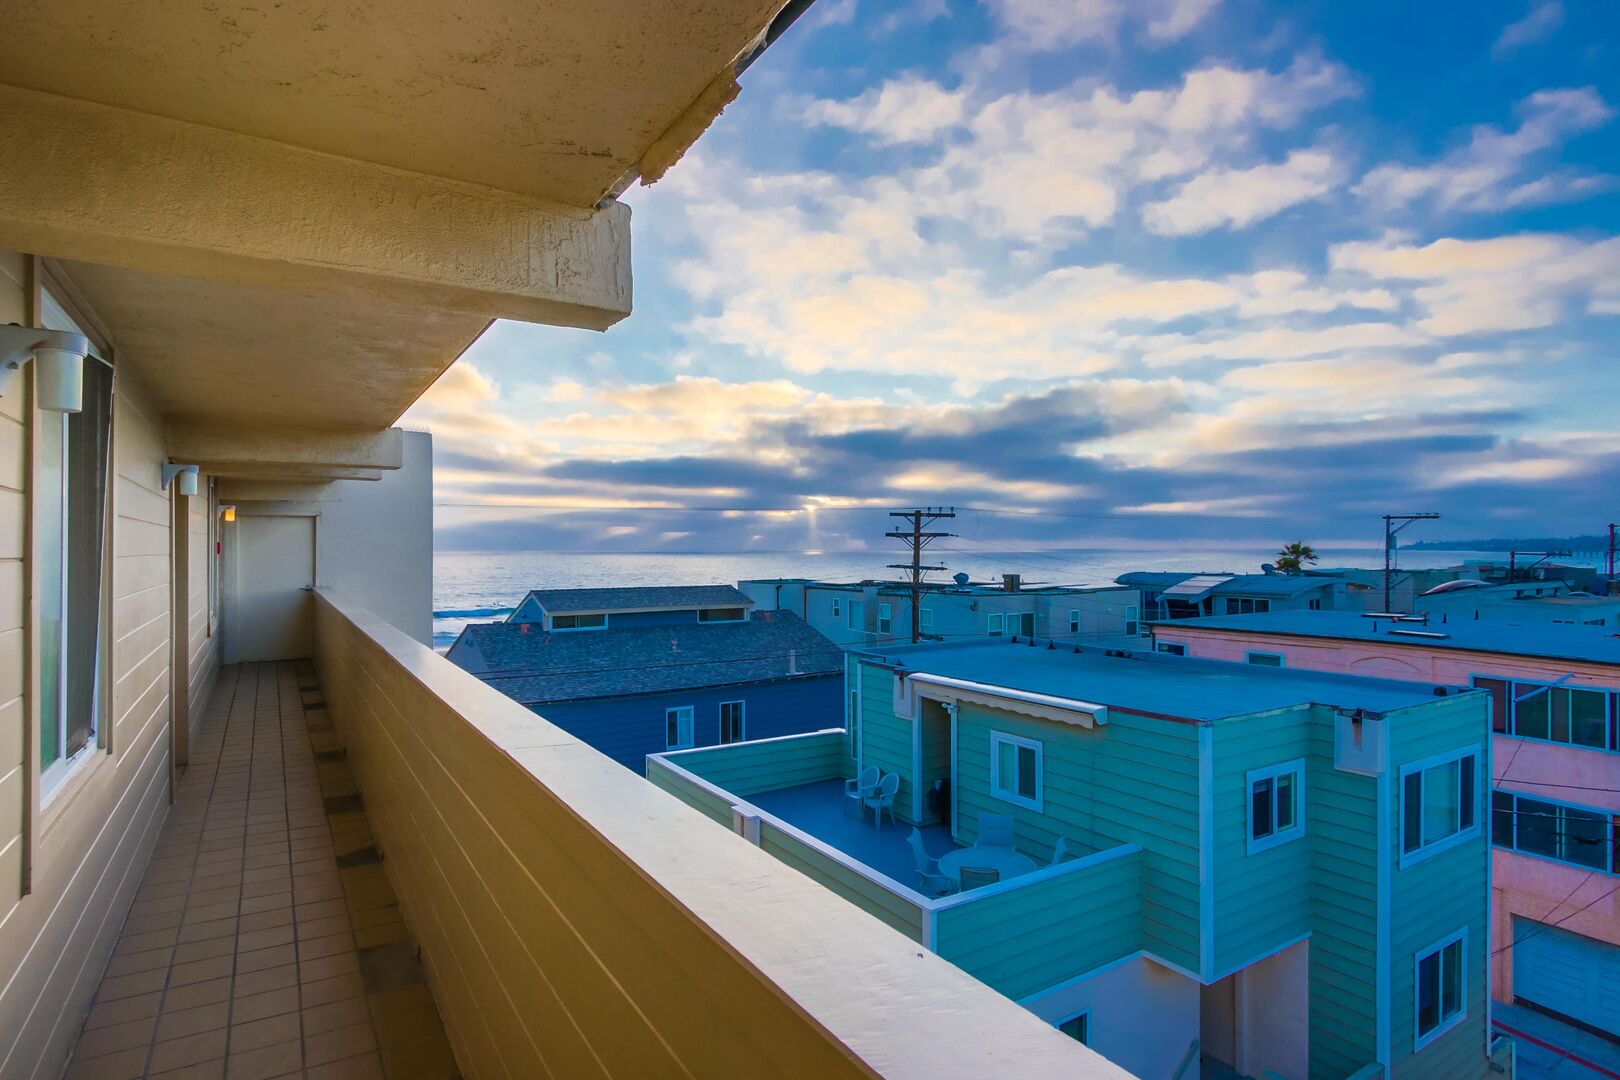 This top floor condo has incredible views of the ocean and the bay